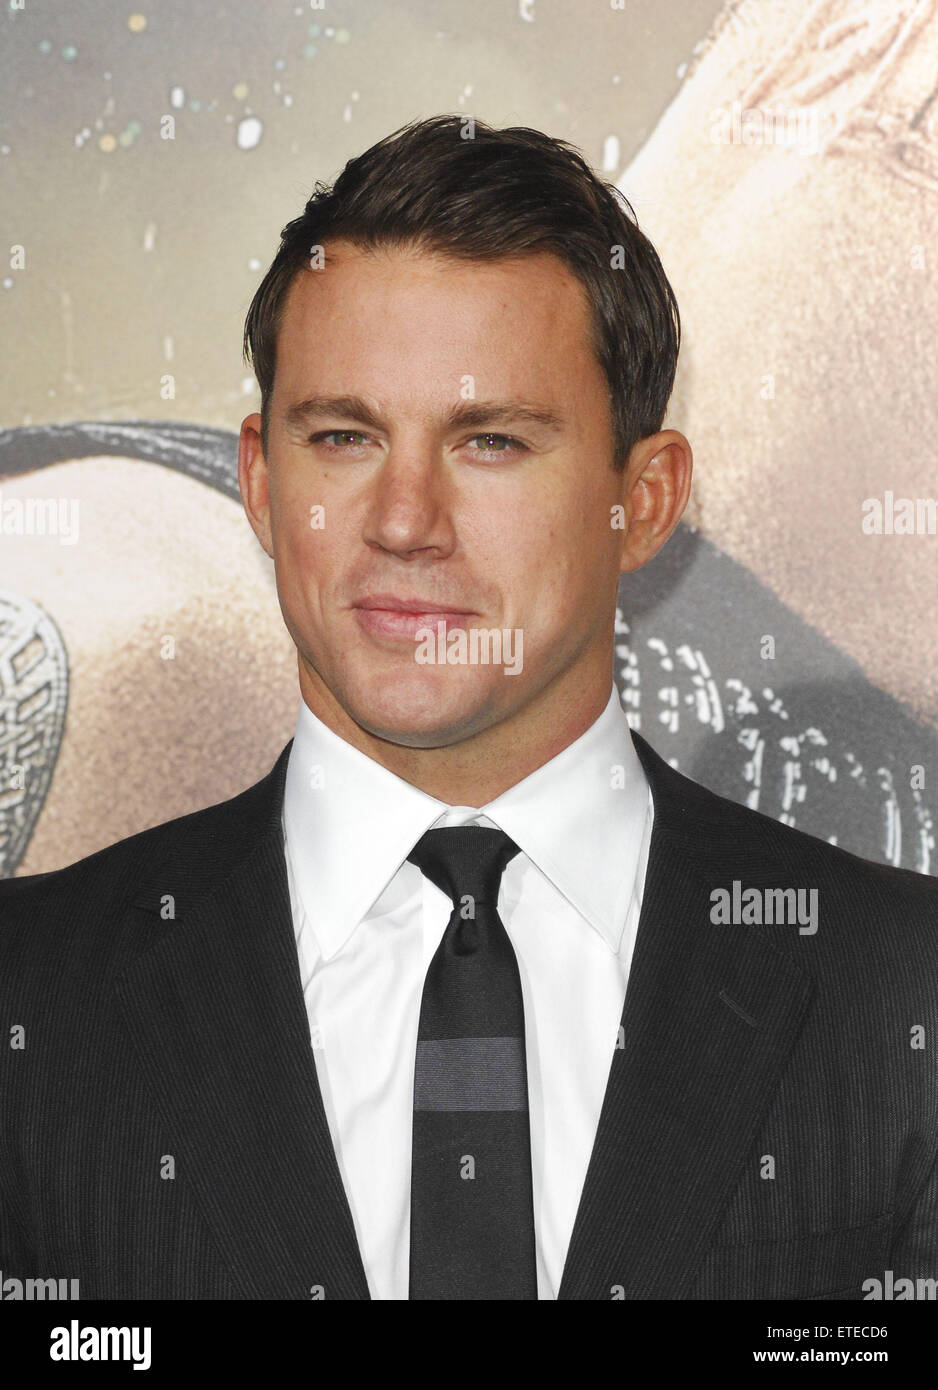 Los Angeles premiere of 'Jupiter Ascending' at TCL Chinese Theatre - Arrivals  Featuring: Channing Tatum Where: Los Angeles, California, United States When: 02 Feb 2015 Credit: Apega/WENN.com Stock Photo